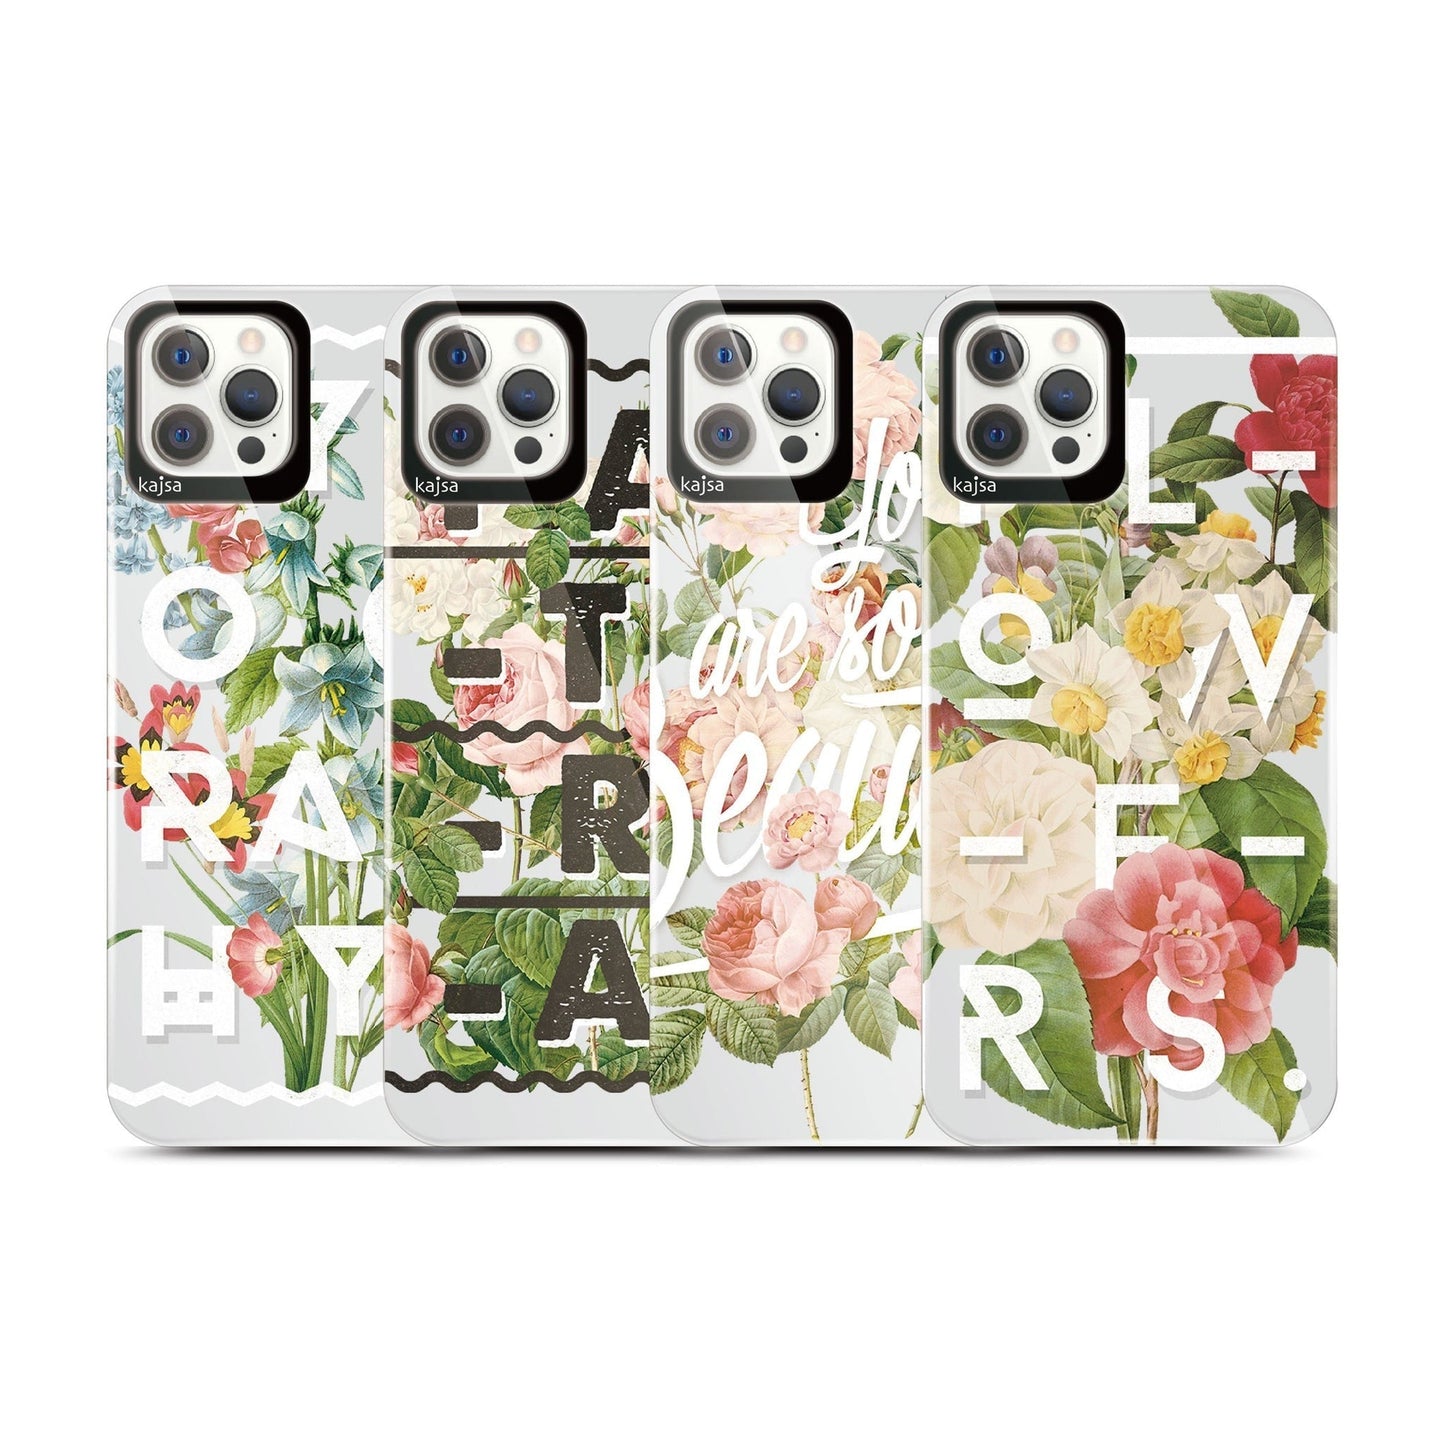 Kajsa Floral Pattern Cover For Iphone